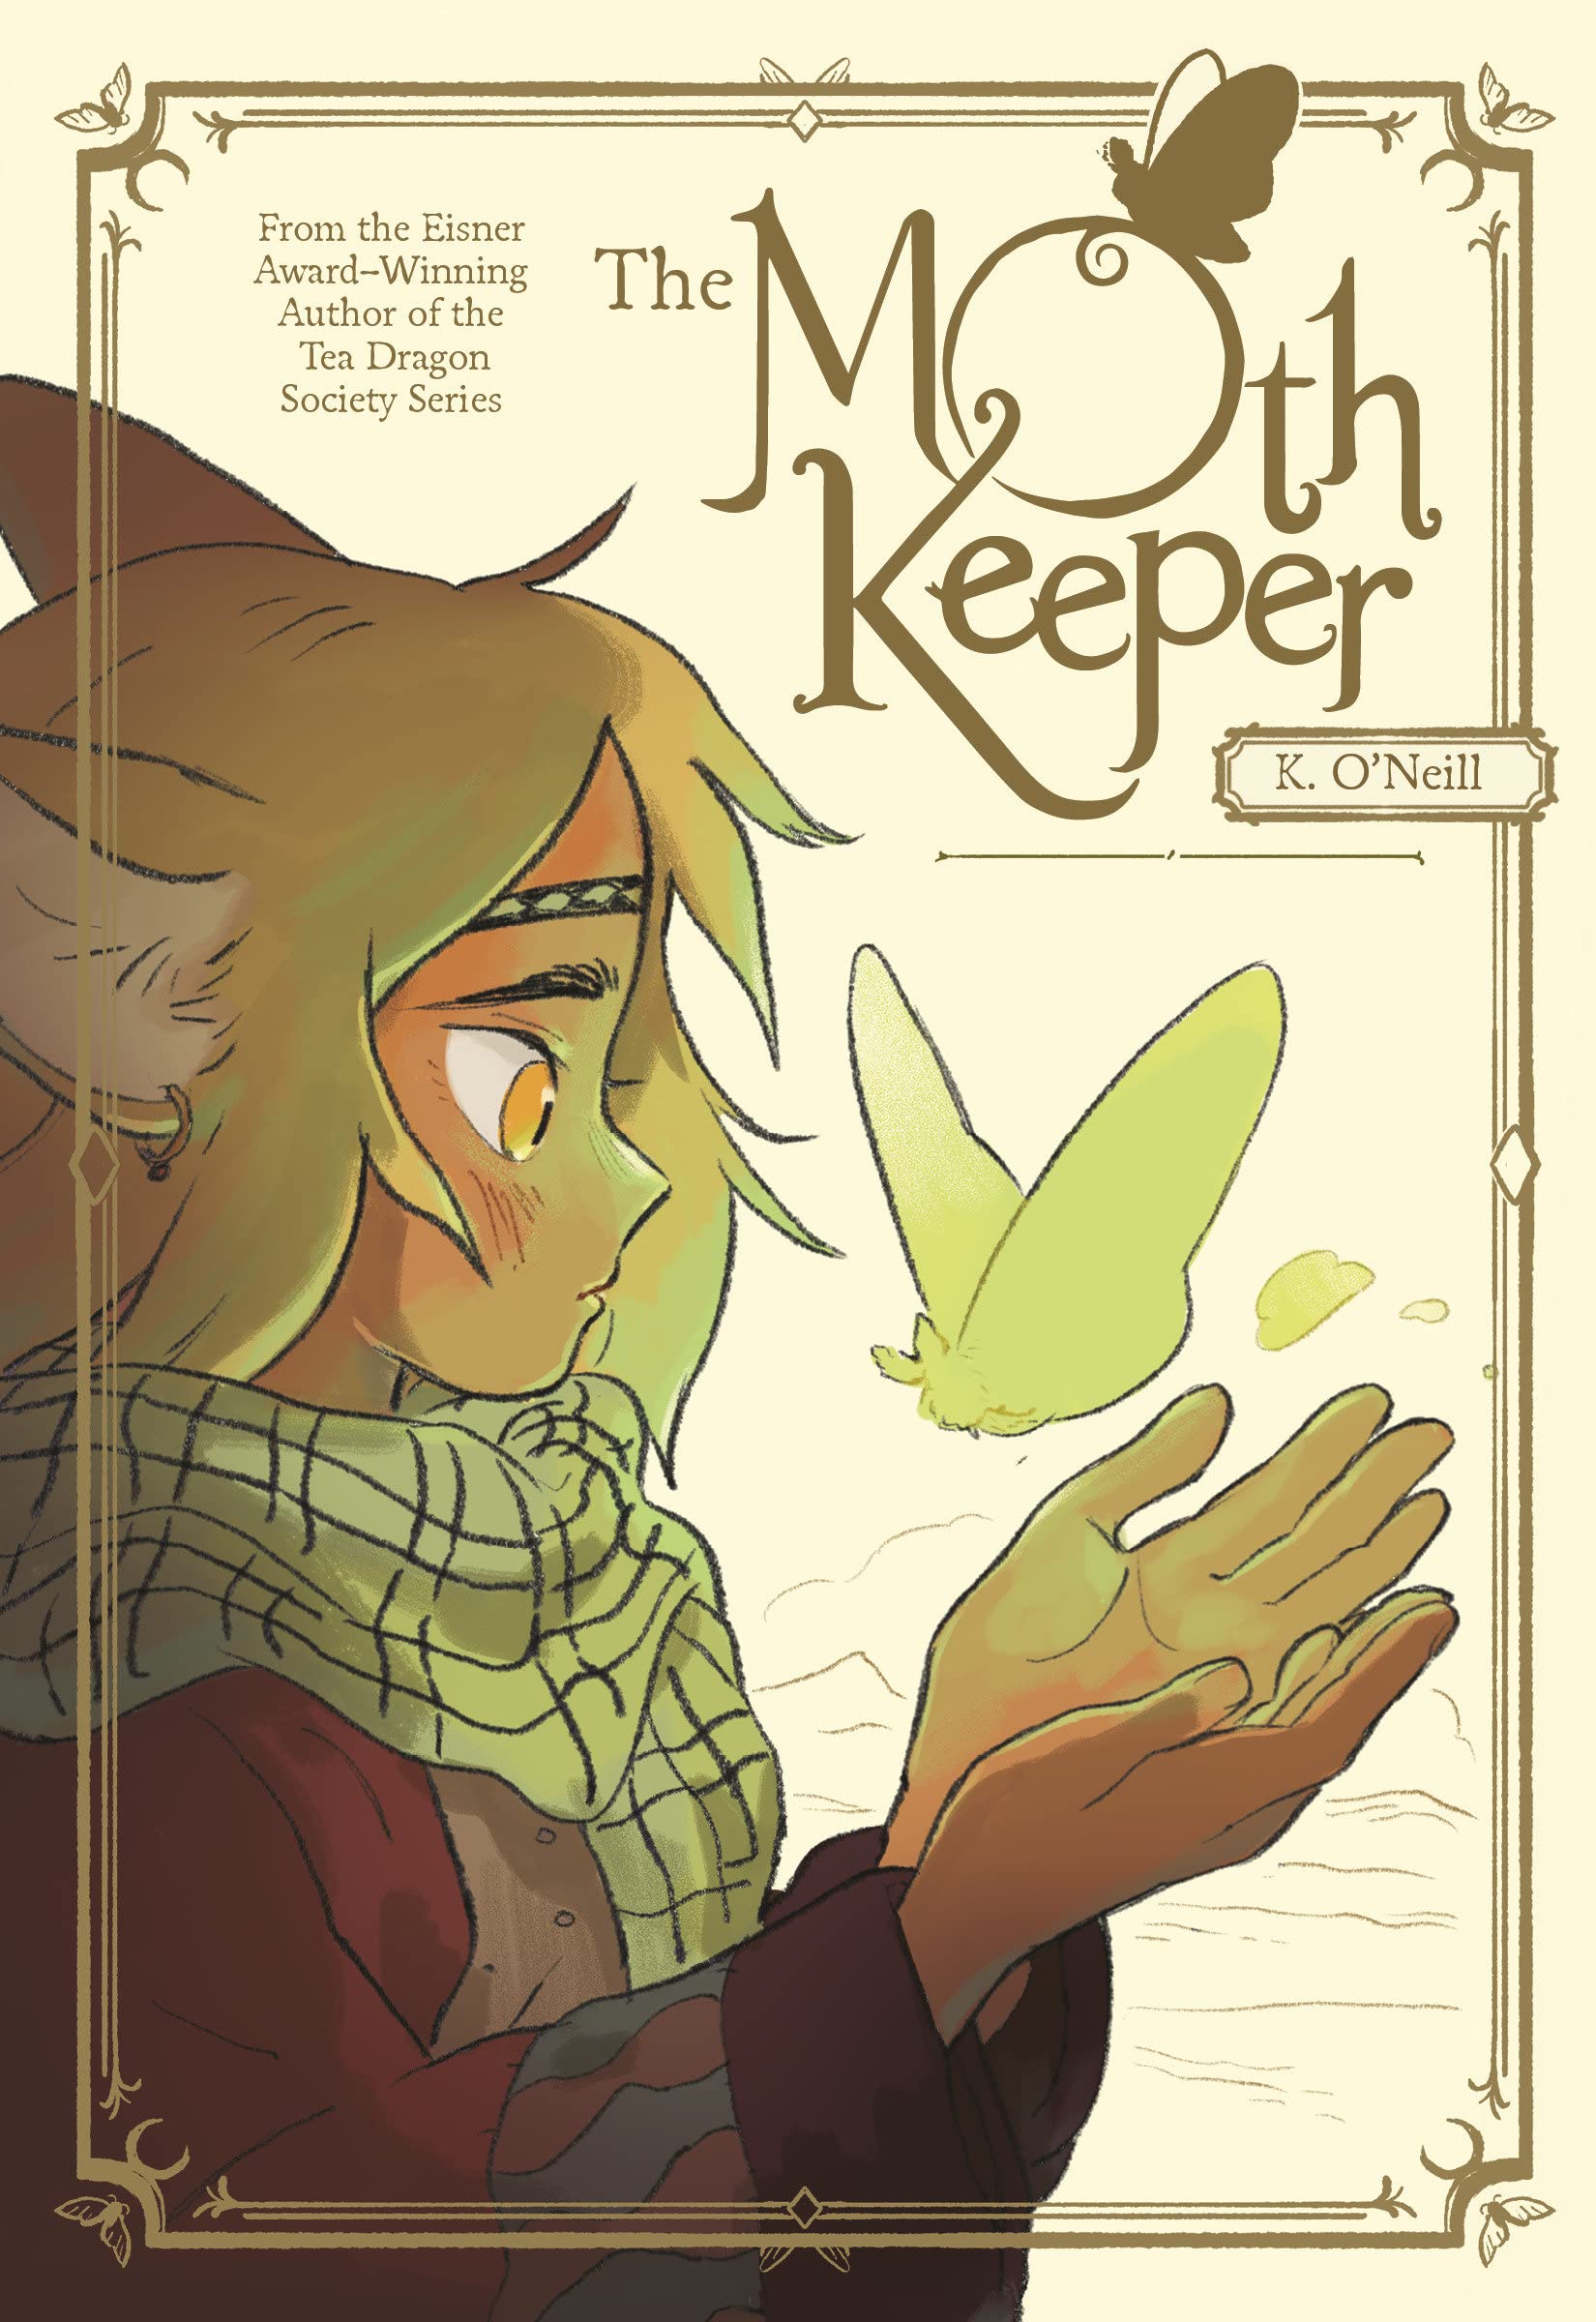 The Moth Keeper—25 Best New Books for 7th Graders